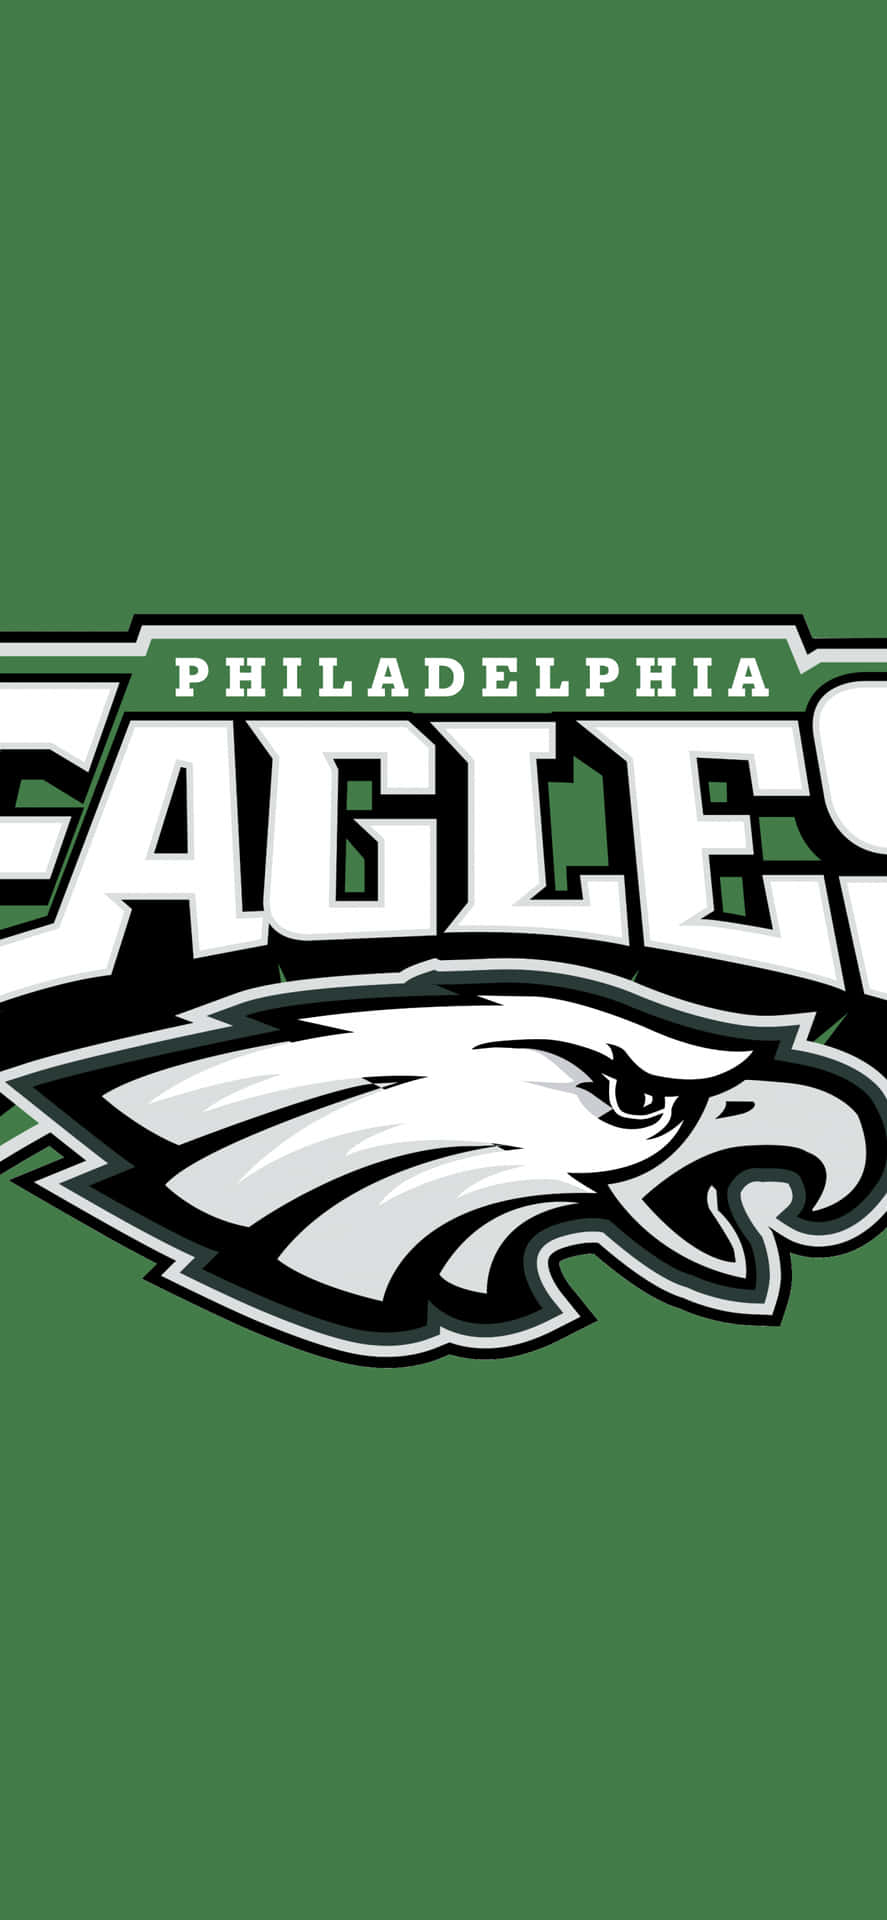 Fly Eagles Fly with a Philadelphia Eagles iPhone Wallpaper